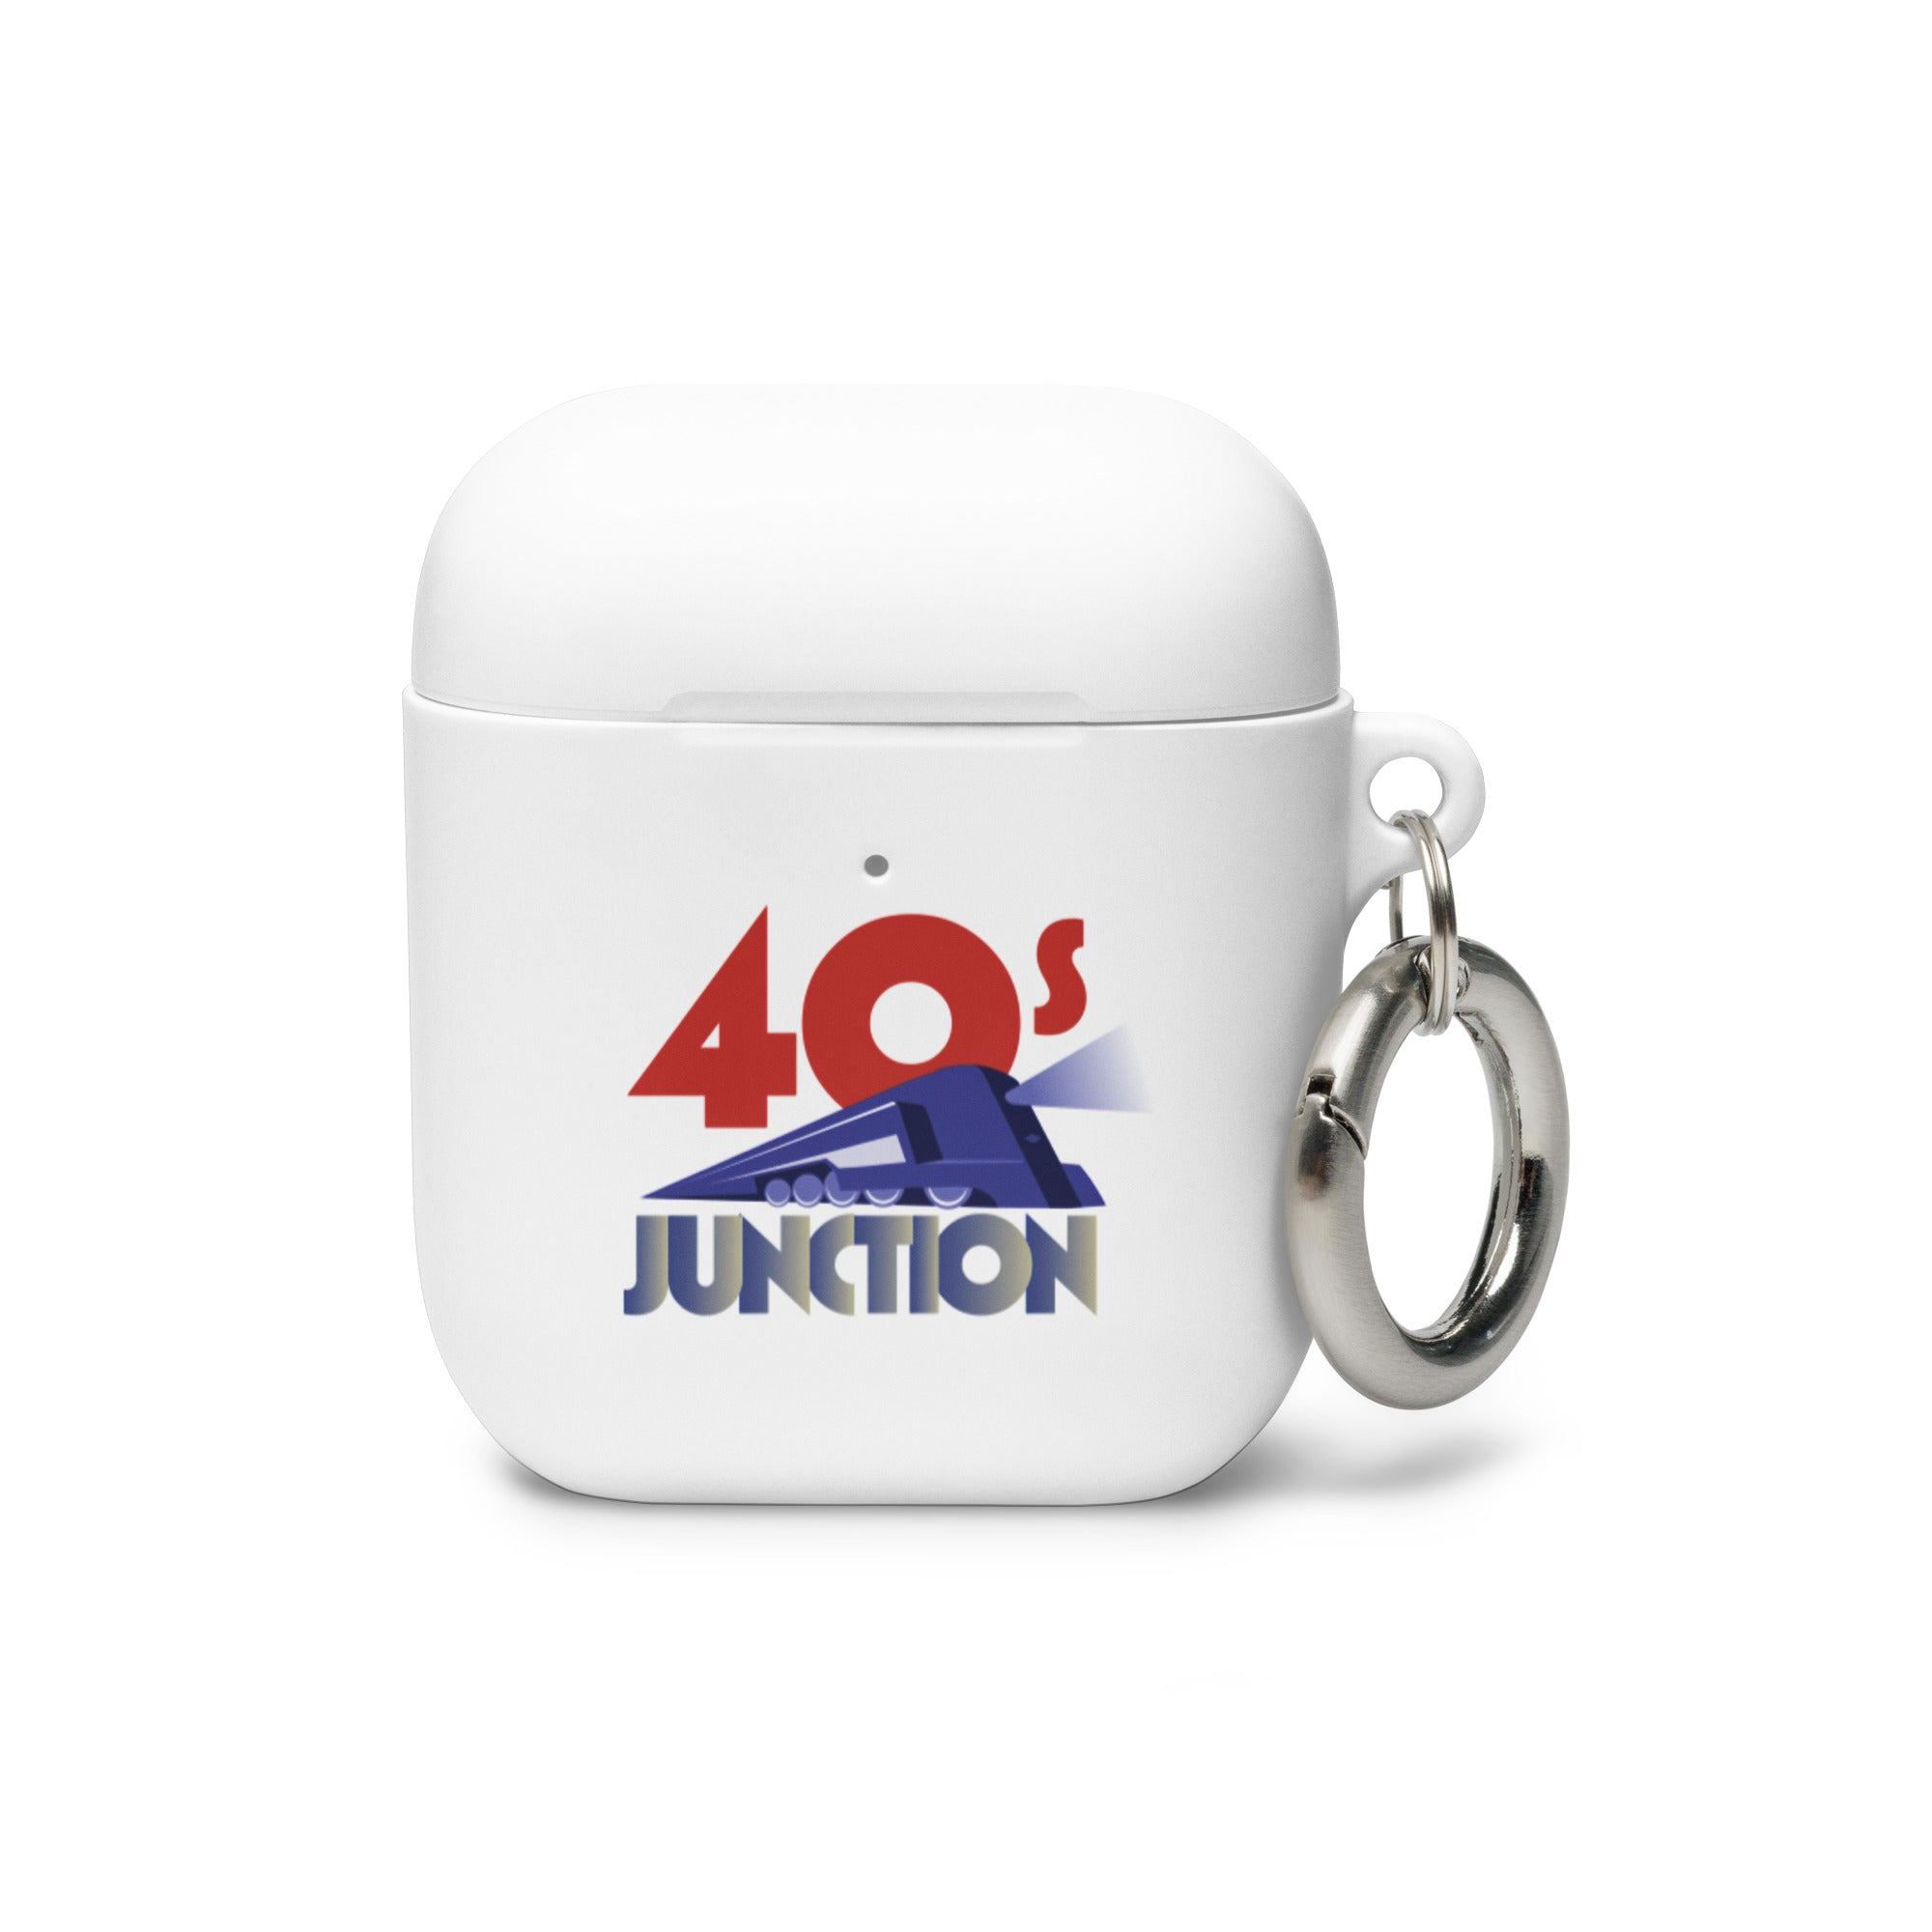 40s Junction: AirPods® Case Cover